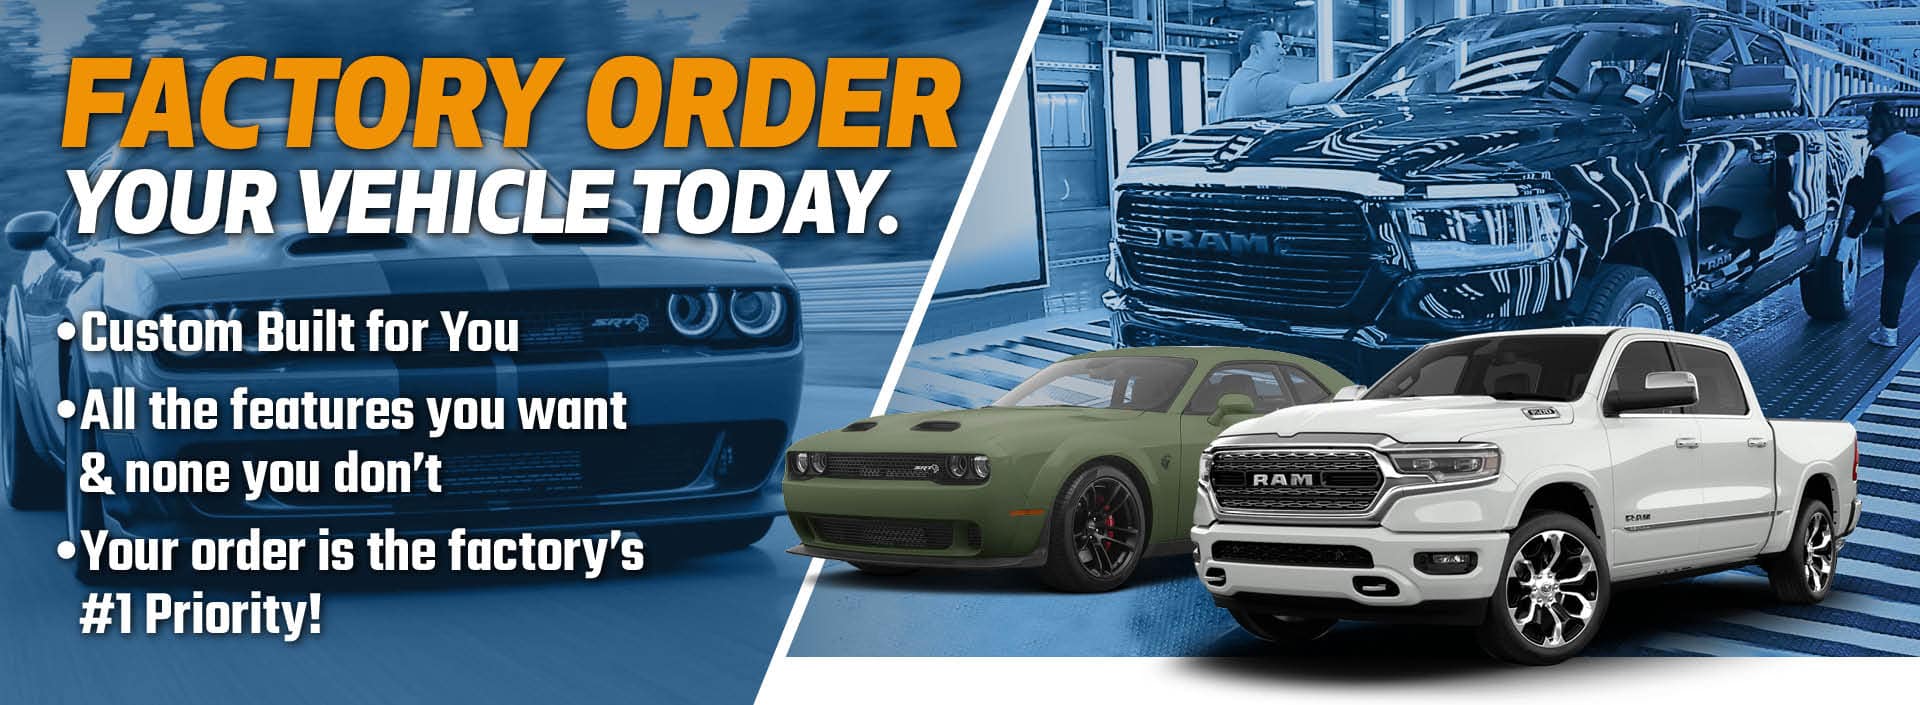 Factory Order Your Vehicle Today